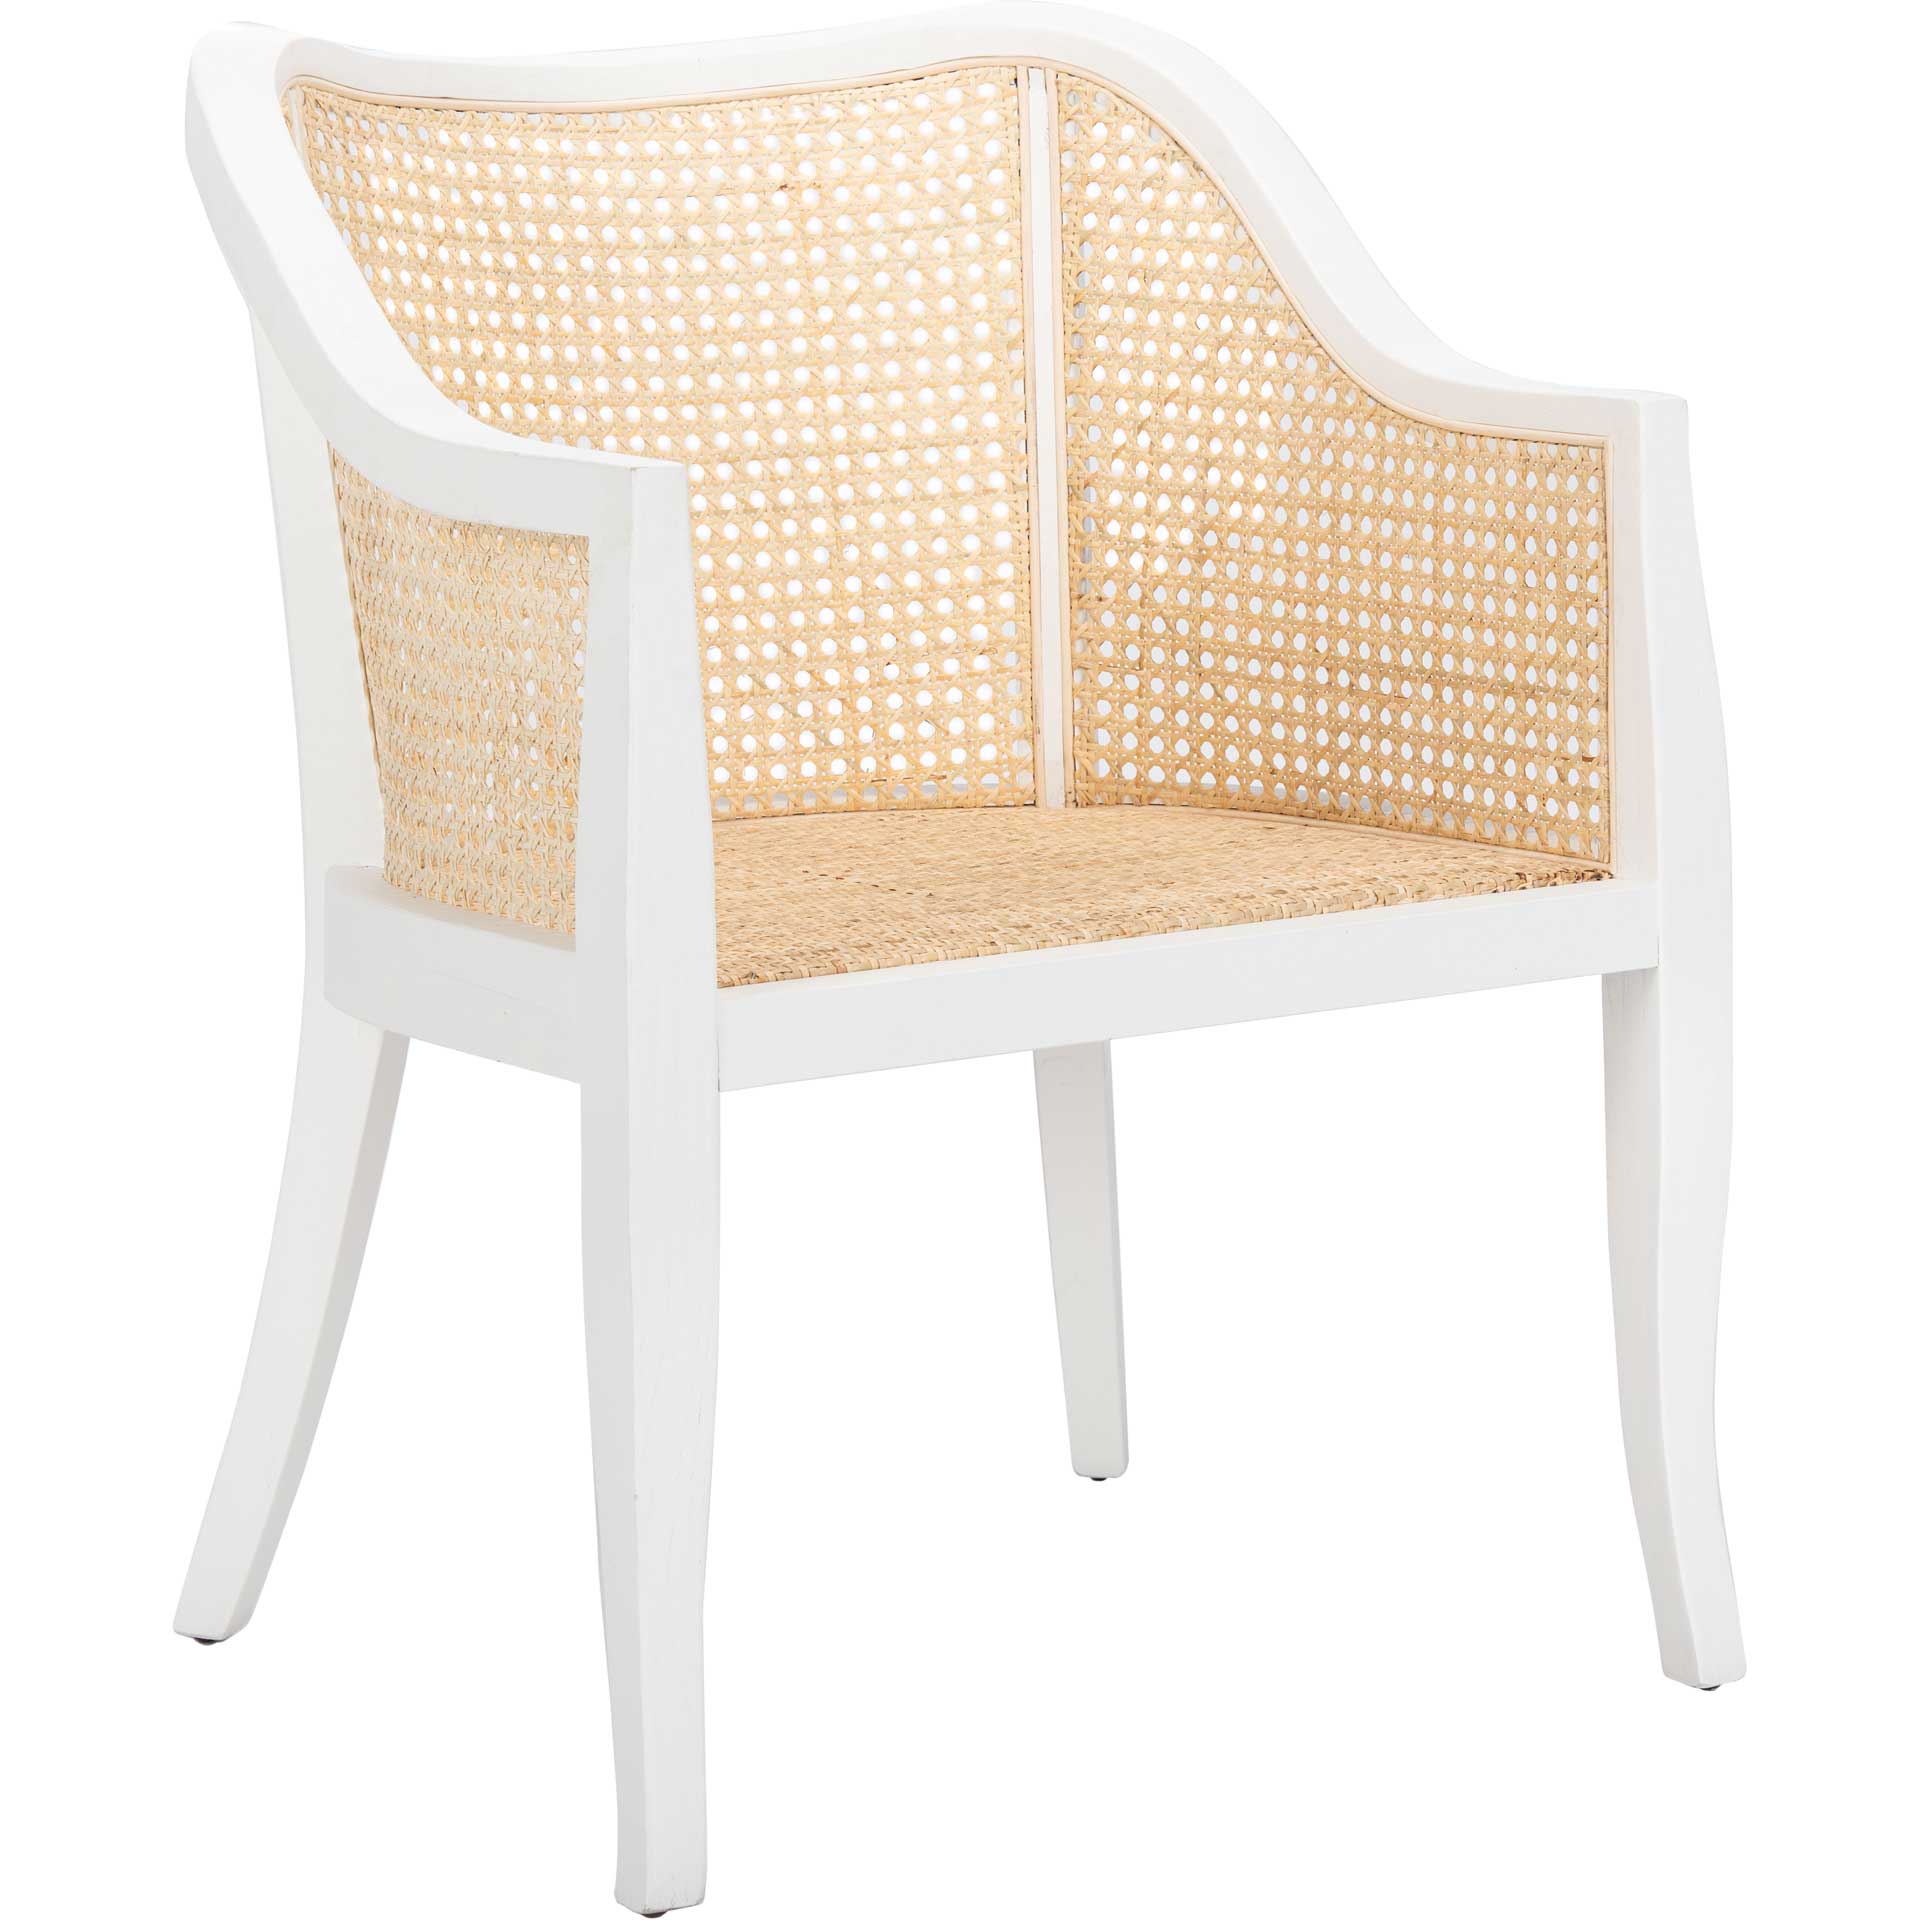 Maddox Dining Chair White/Natural